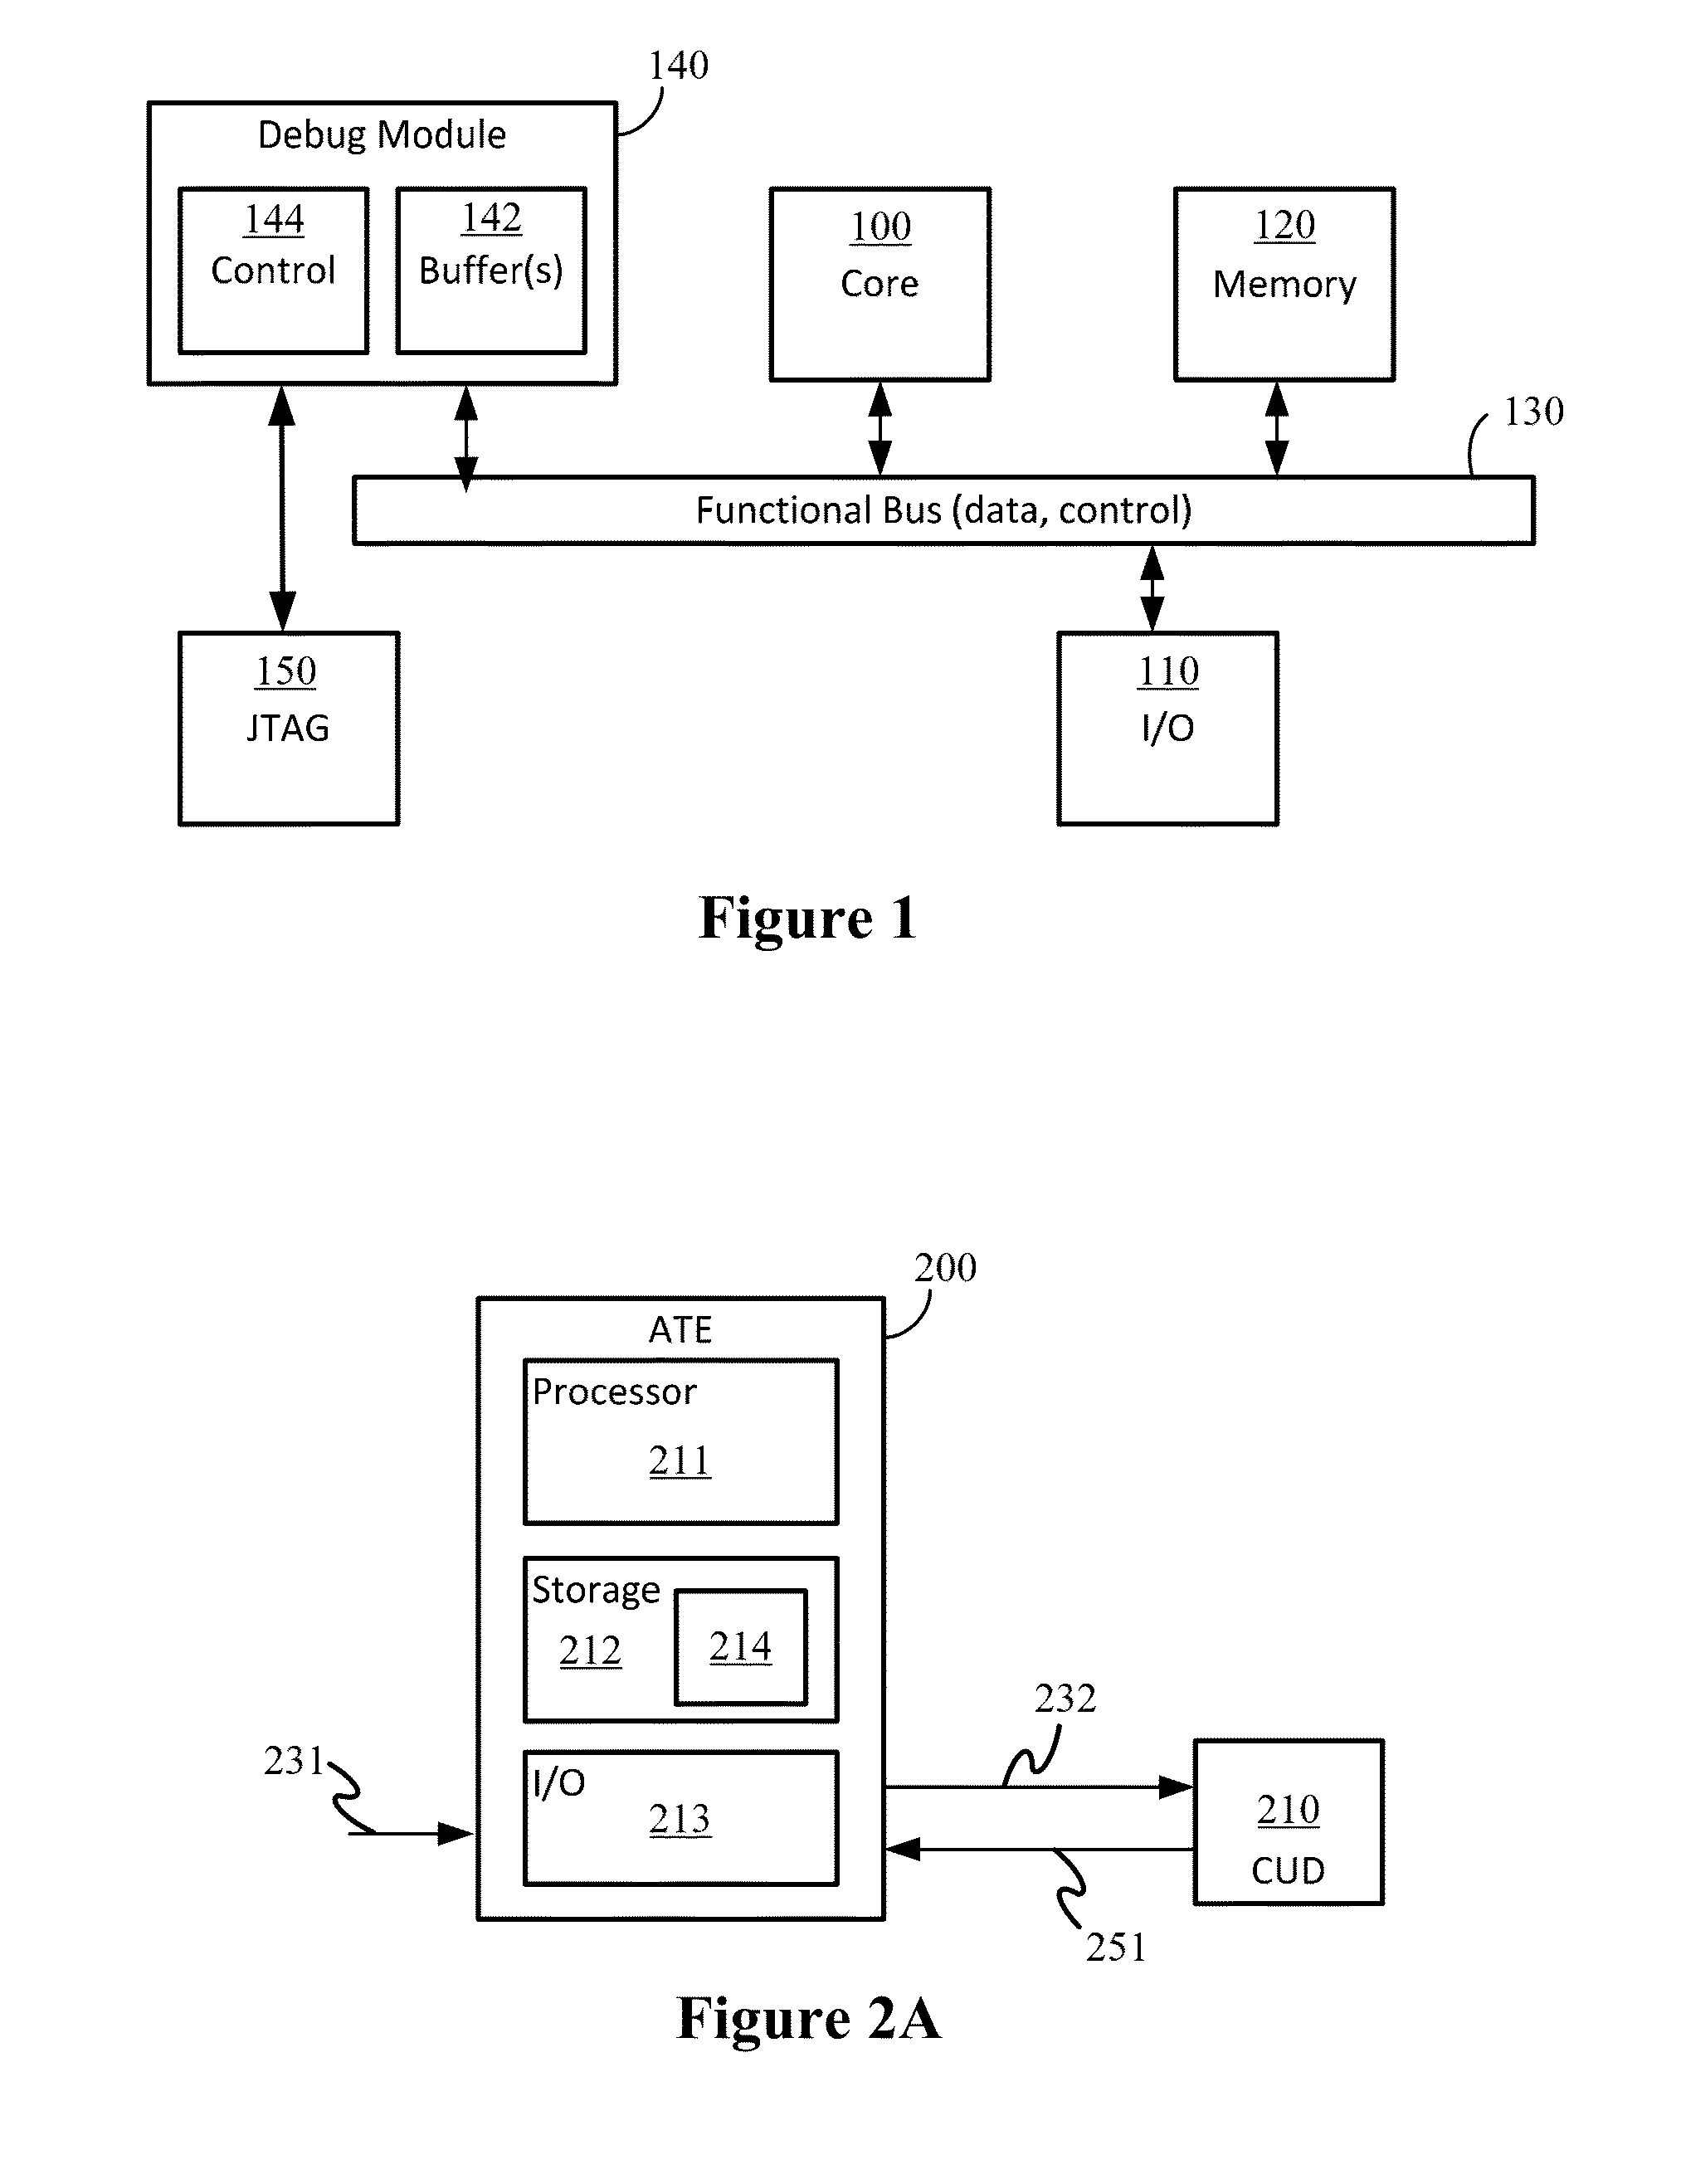 Signal tracing using on-chip memory for in-system post-fabrication debug